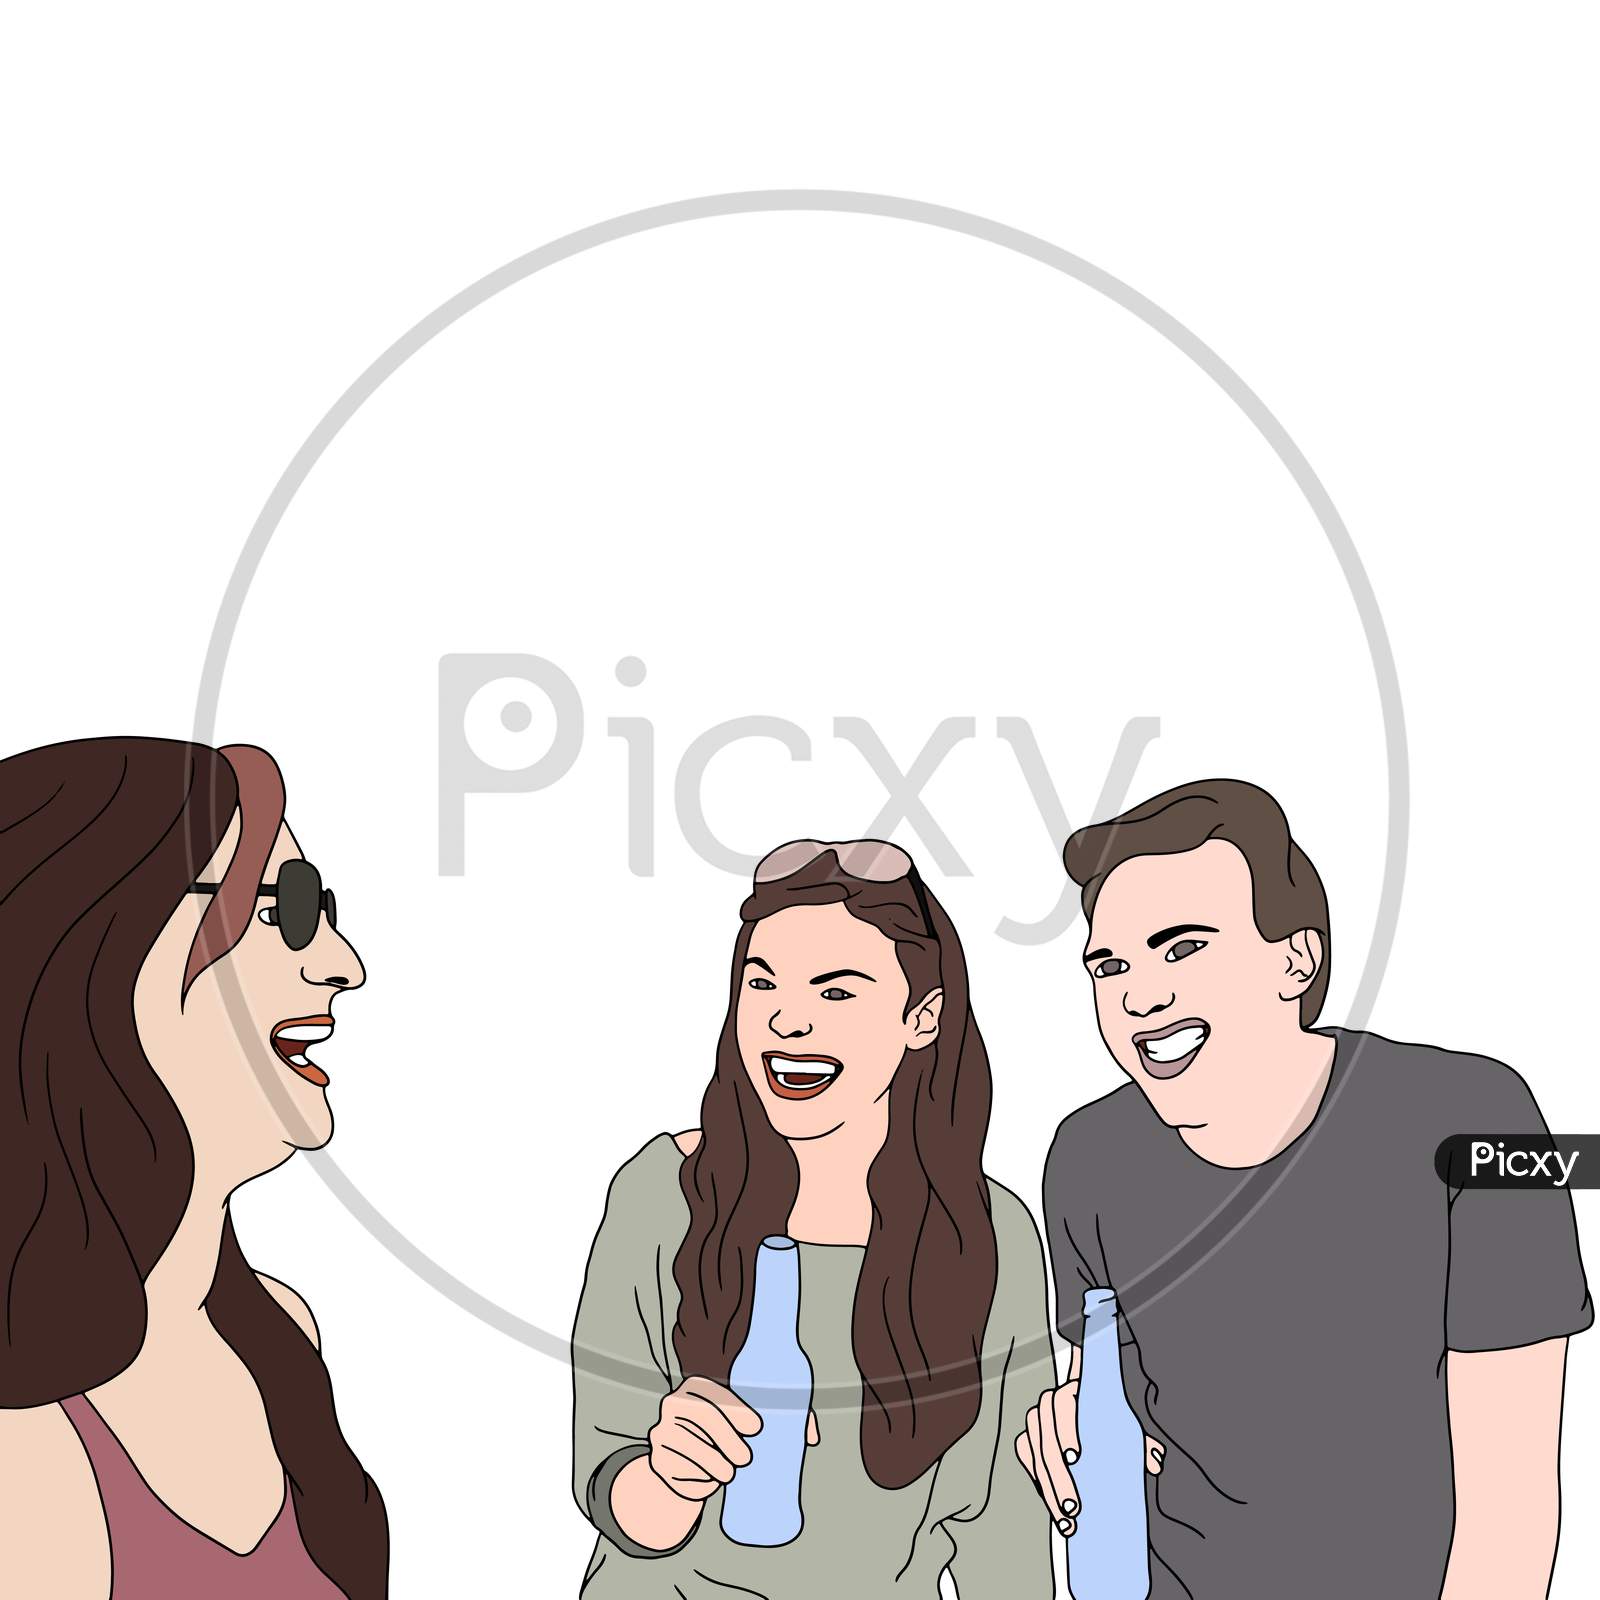 A Group Of Friends Having Outdoor Fun, Friends Time, Flat Colorful Illustration Of People For Friendship Day. Hand-Drawn Character Illustration Of Happy People.